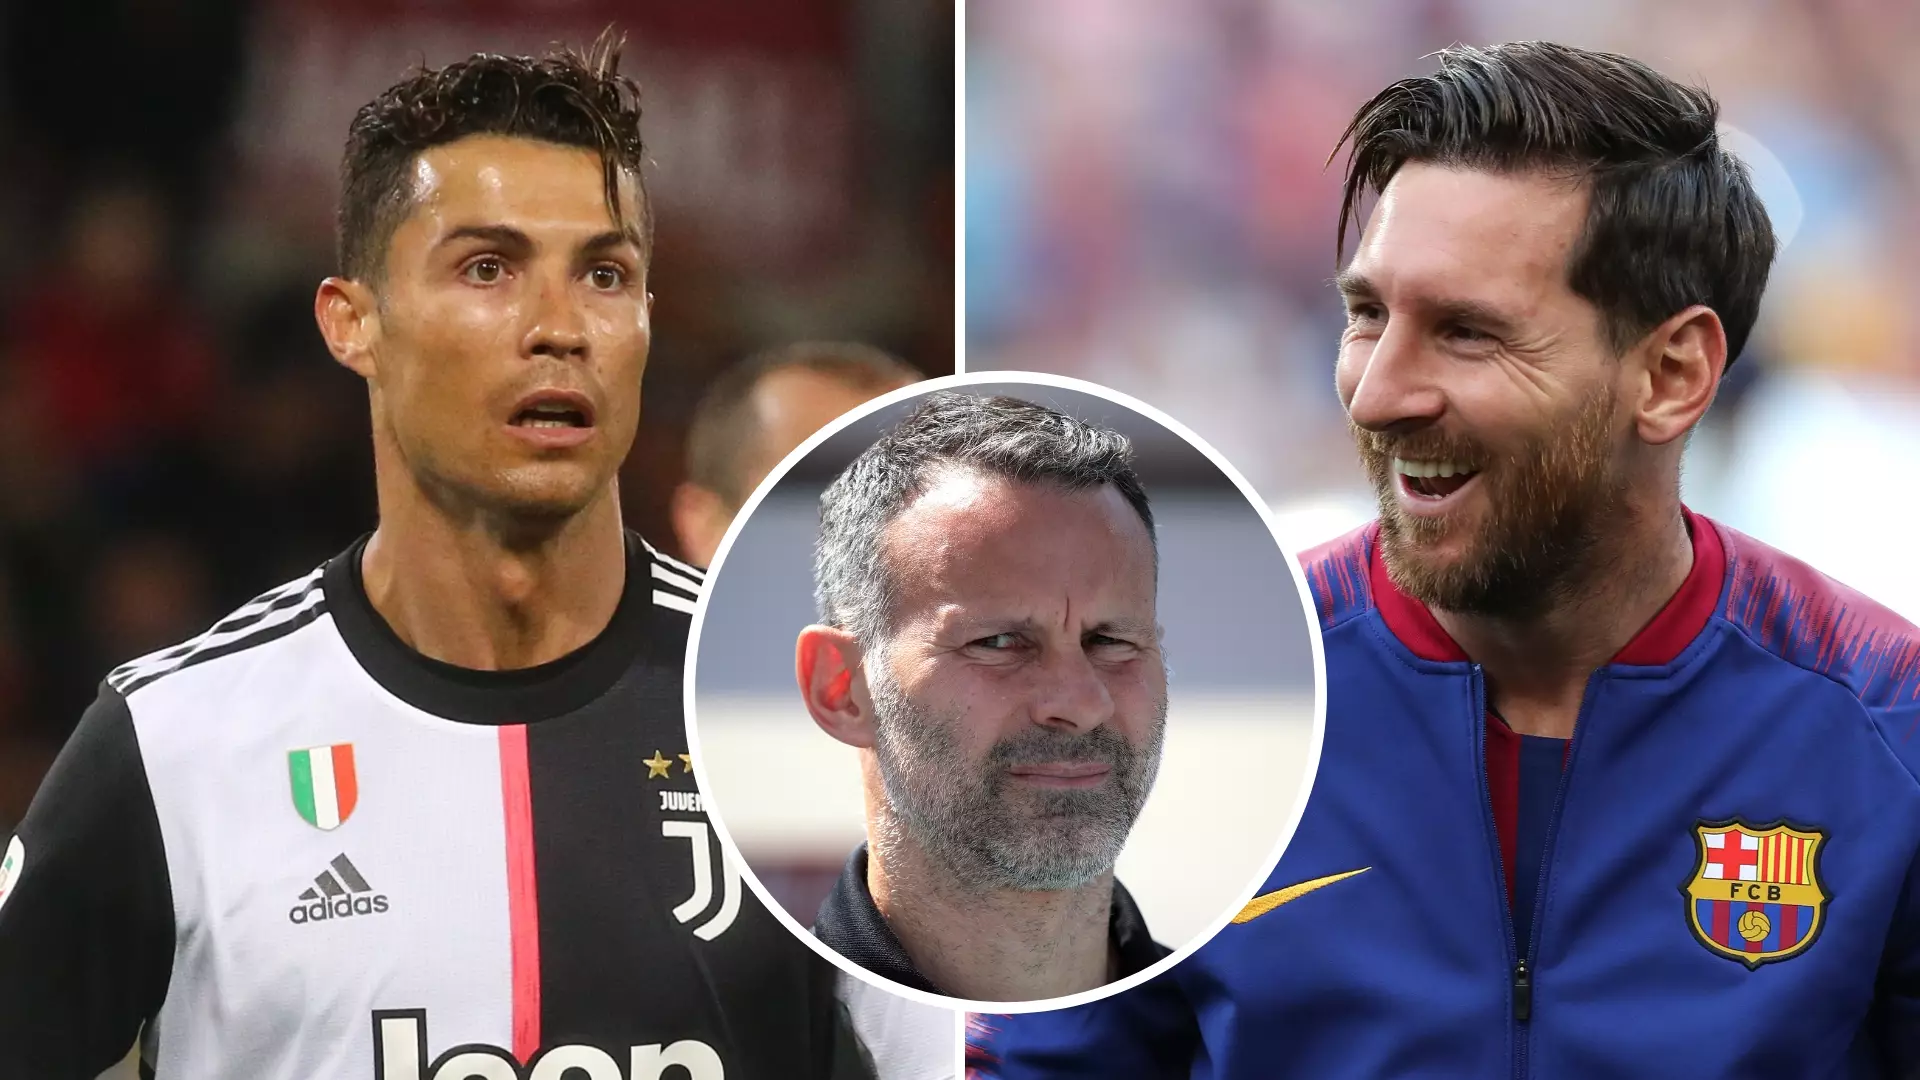 Cristiano Ronaldo's ‘Weird Obsession’ With Lionel Messi Was Called Out By Ryan Giggs In 2018